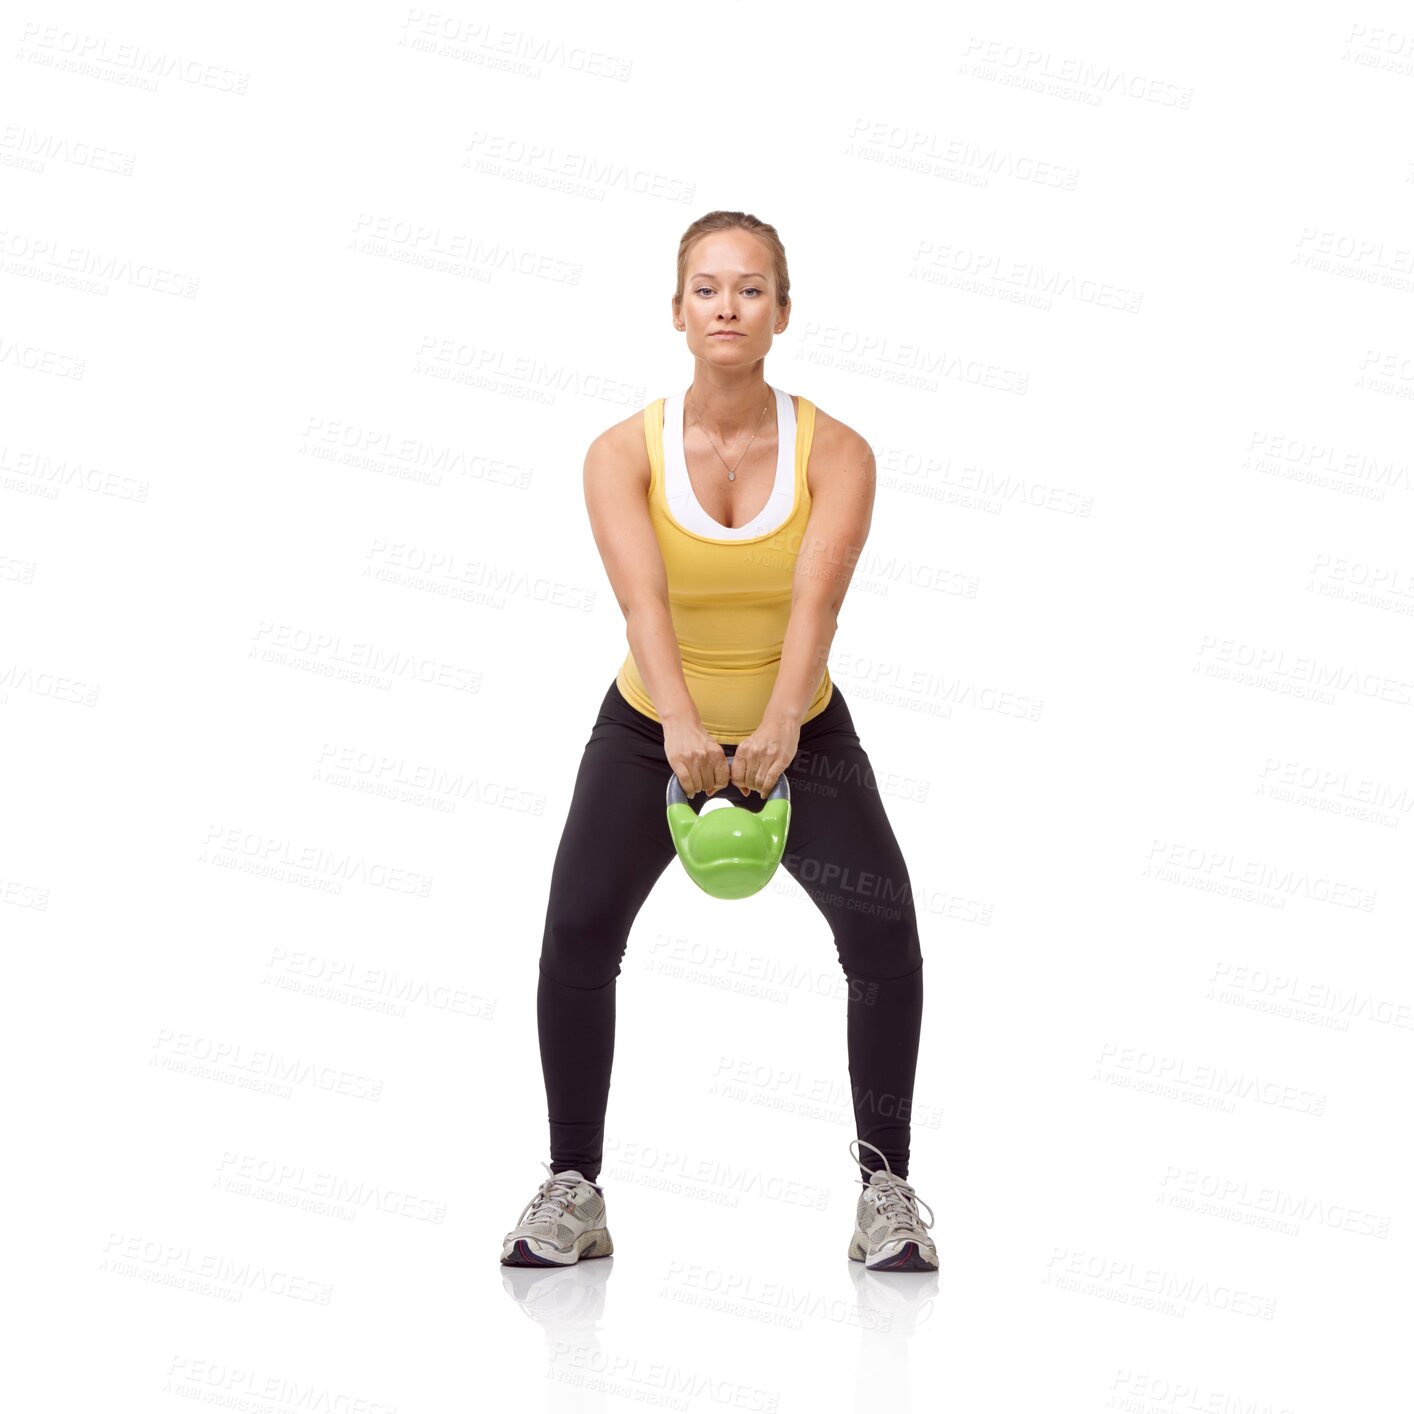 Buy stock photo Workout, portrait or studio woman with kettlebell swing for muscle growth, strong arm strength or heavy weight lifting. Exercise equipment, gym circuit routine or bodybuilder girl on white background